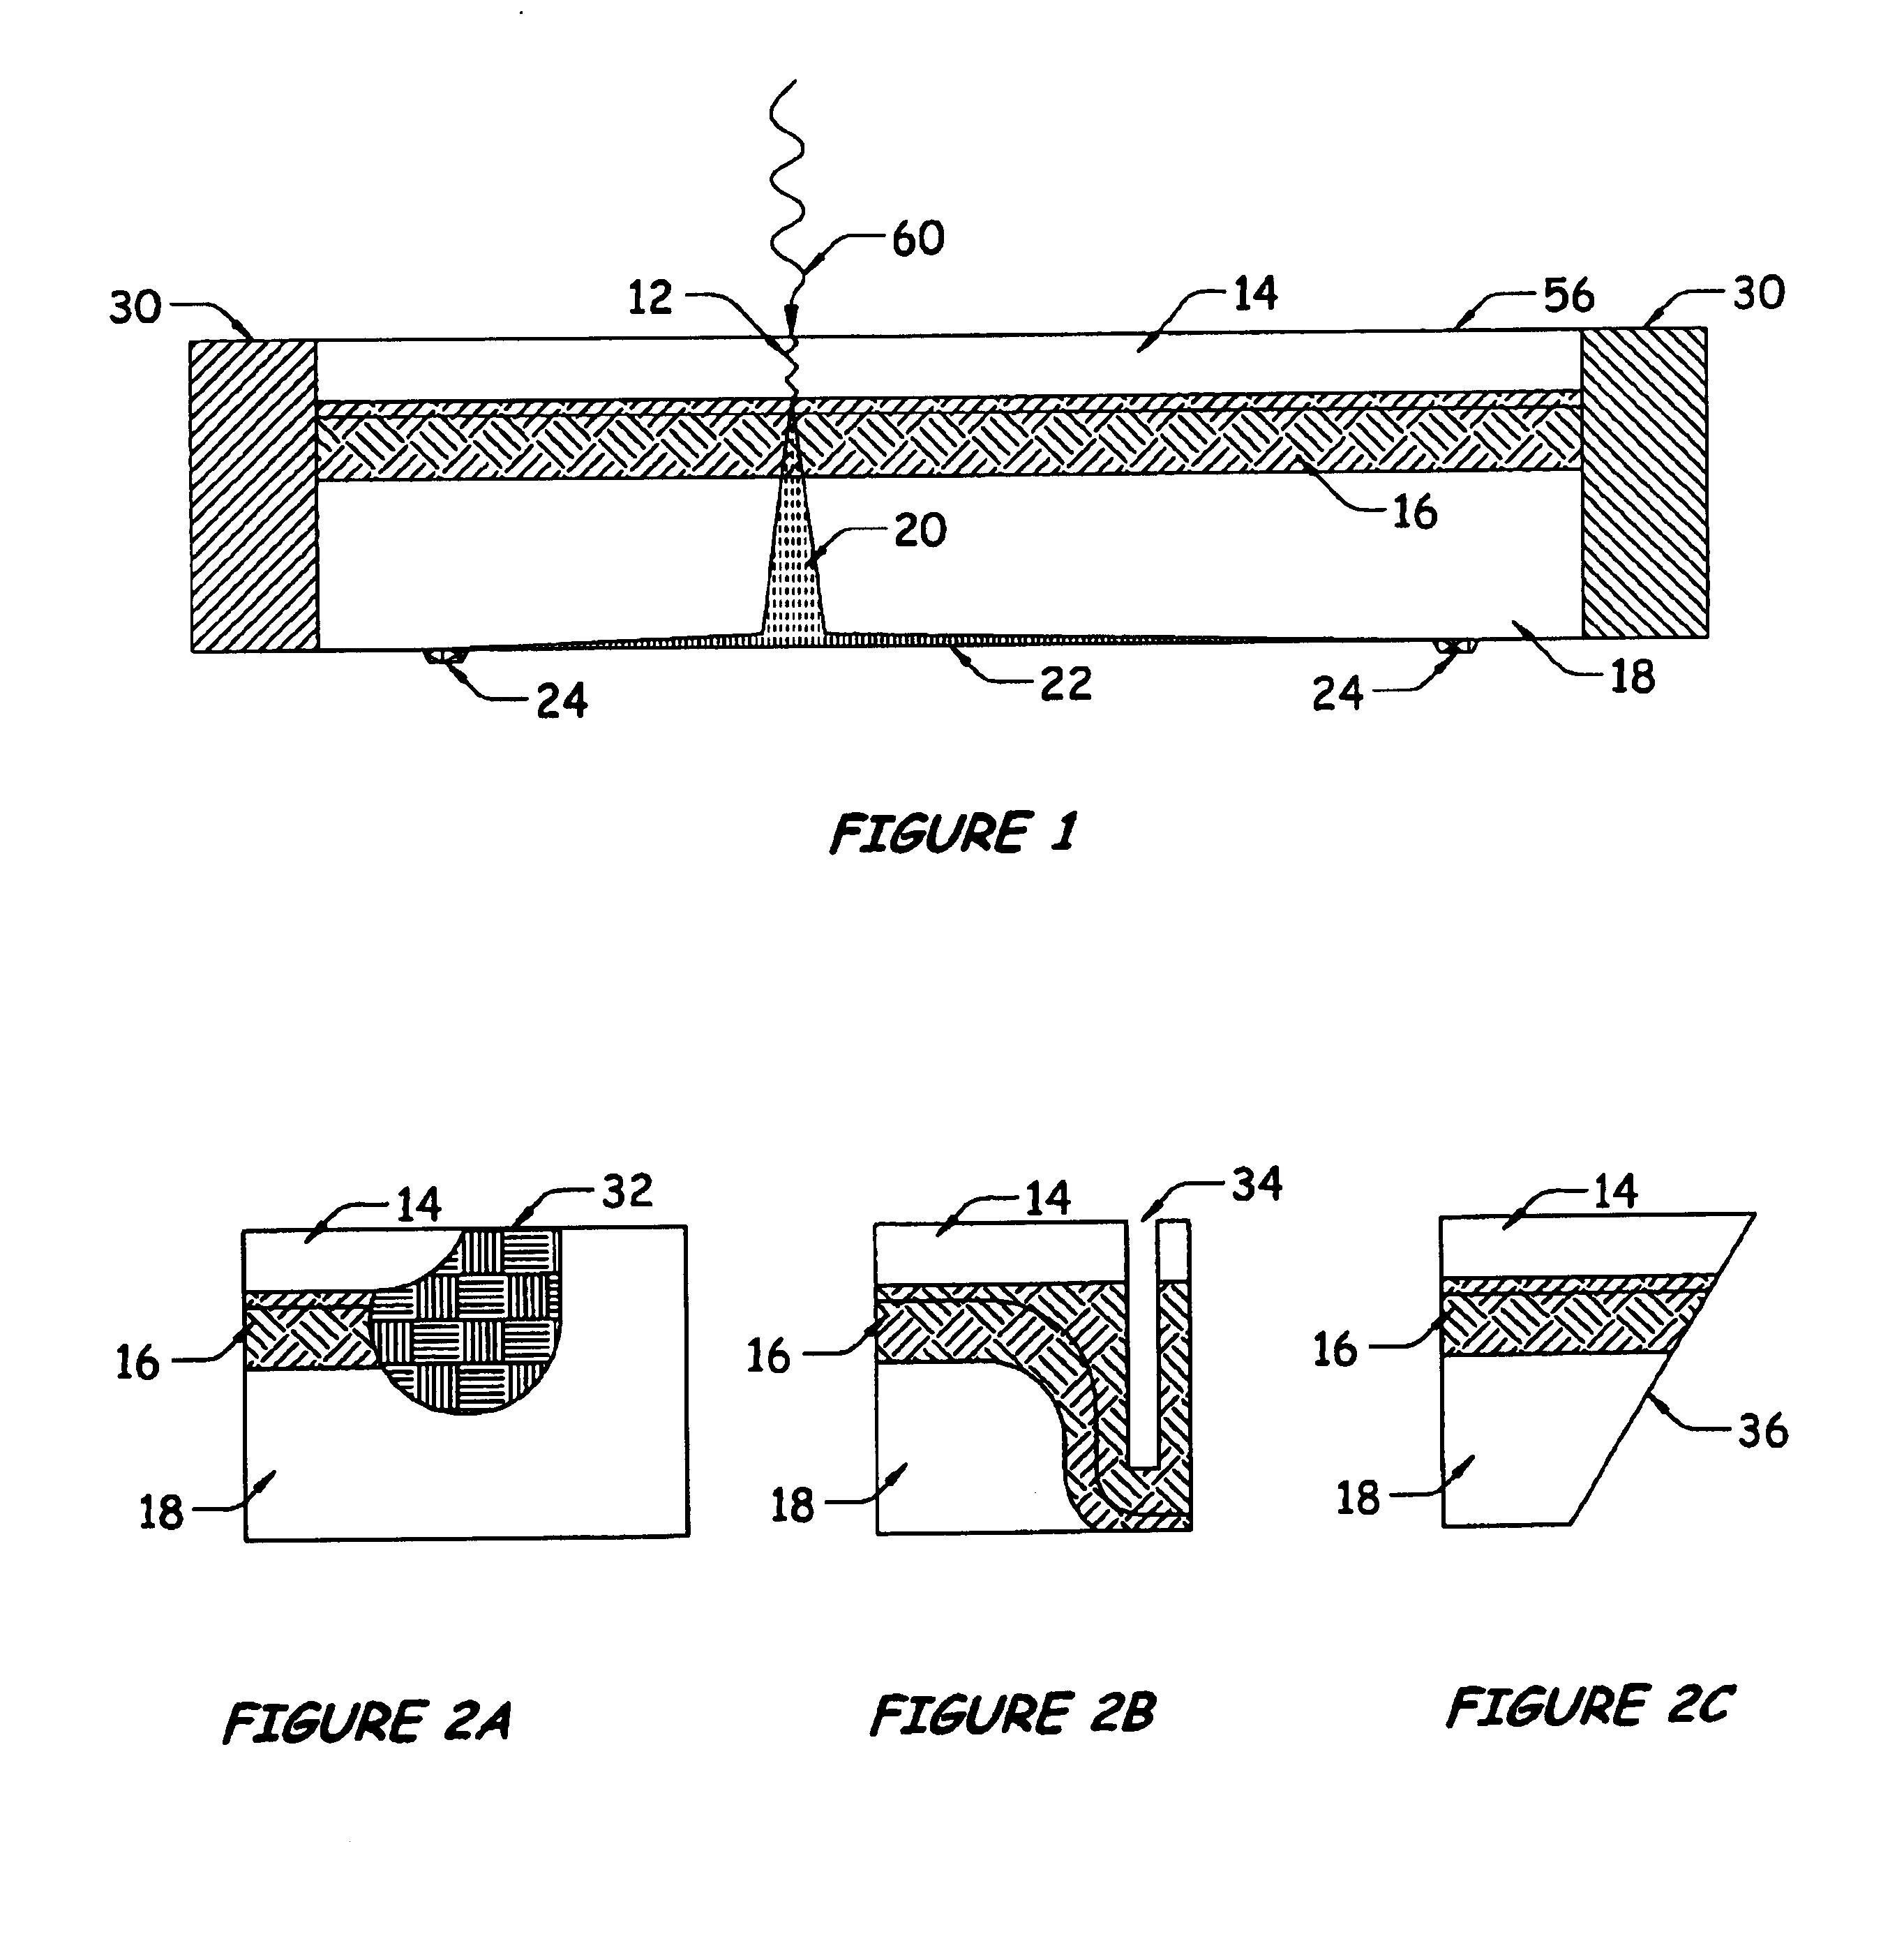 Position sensitive solid state detector with internal gain